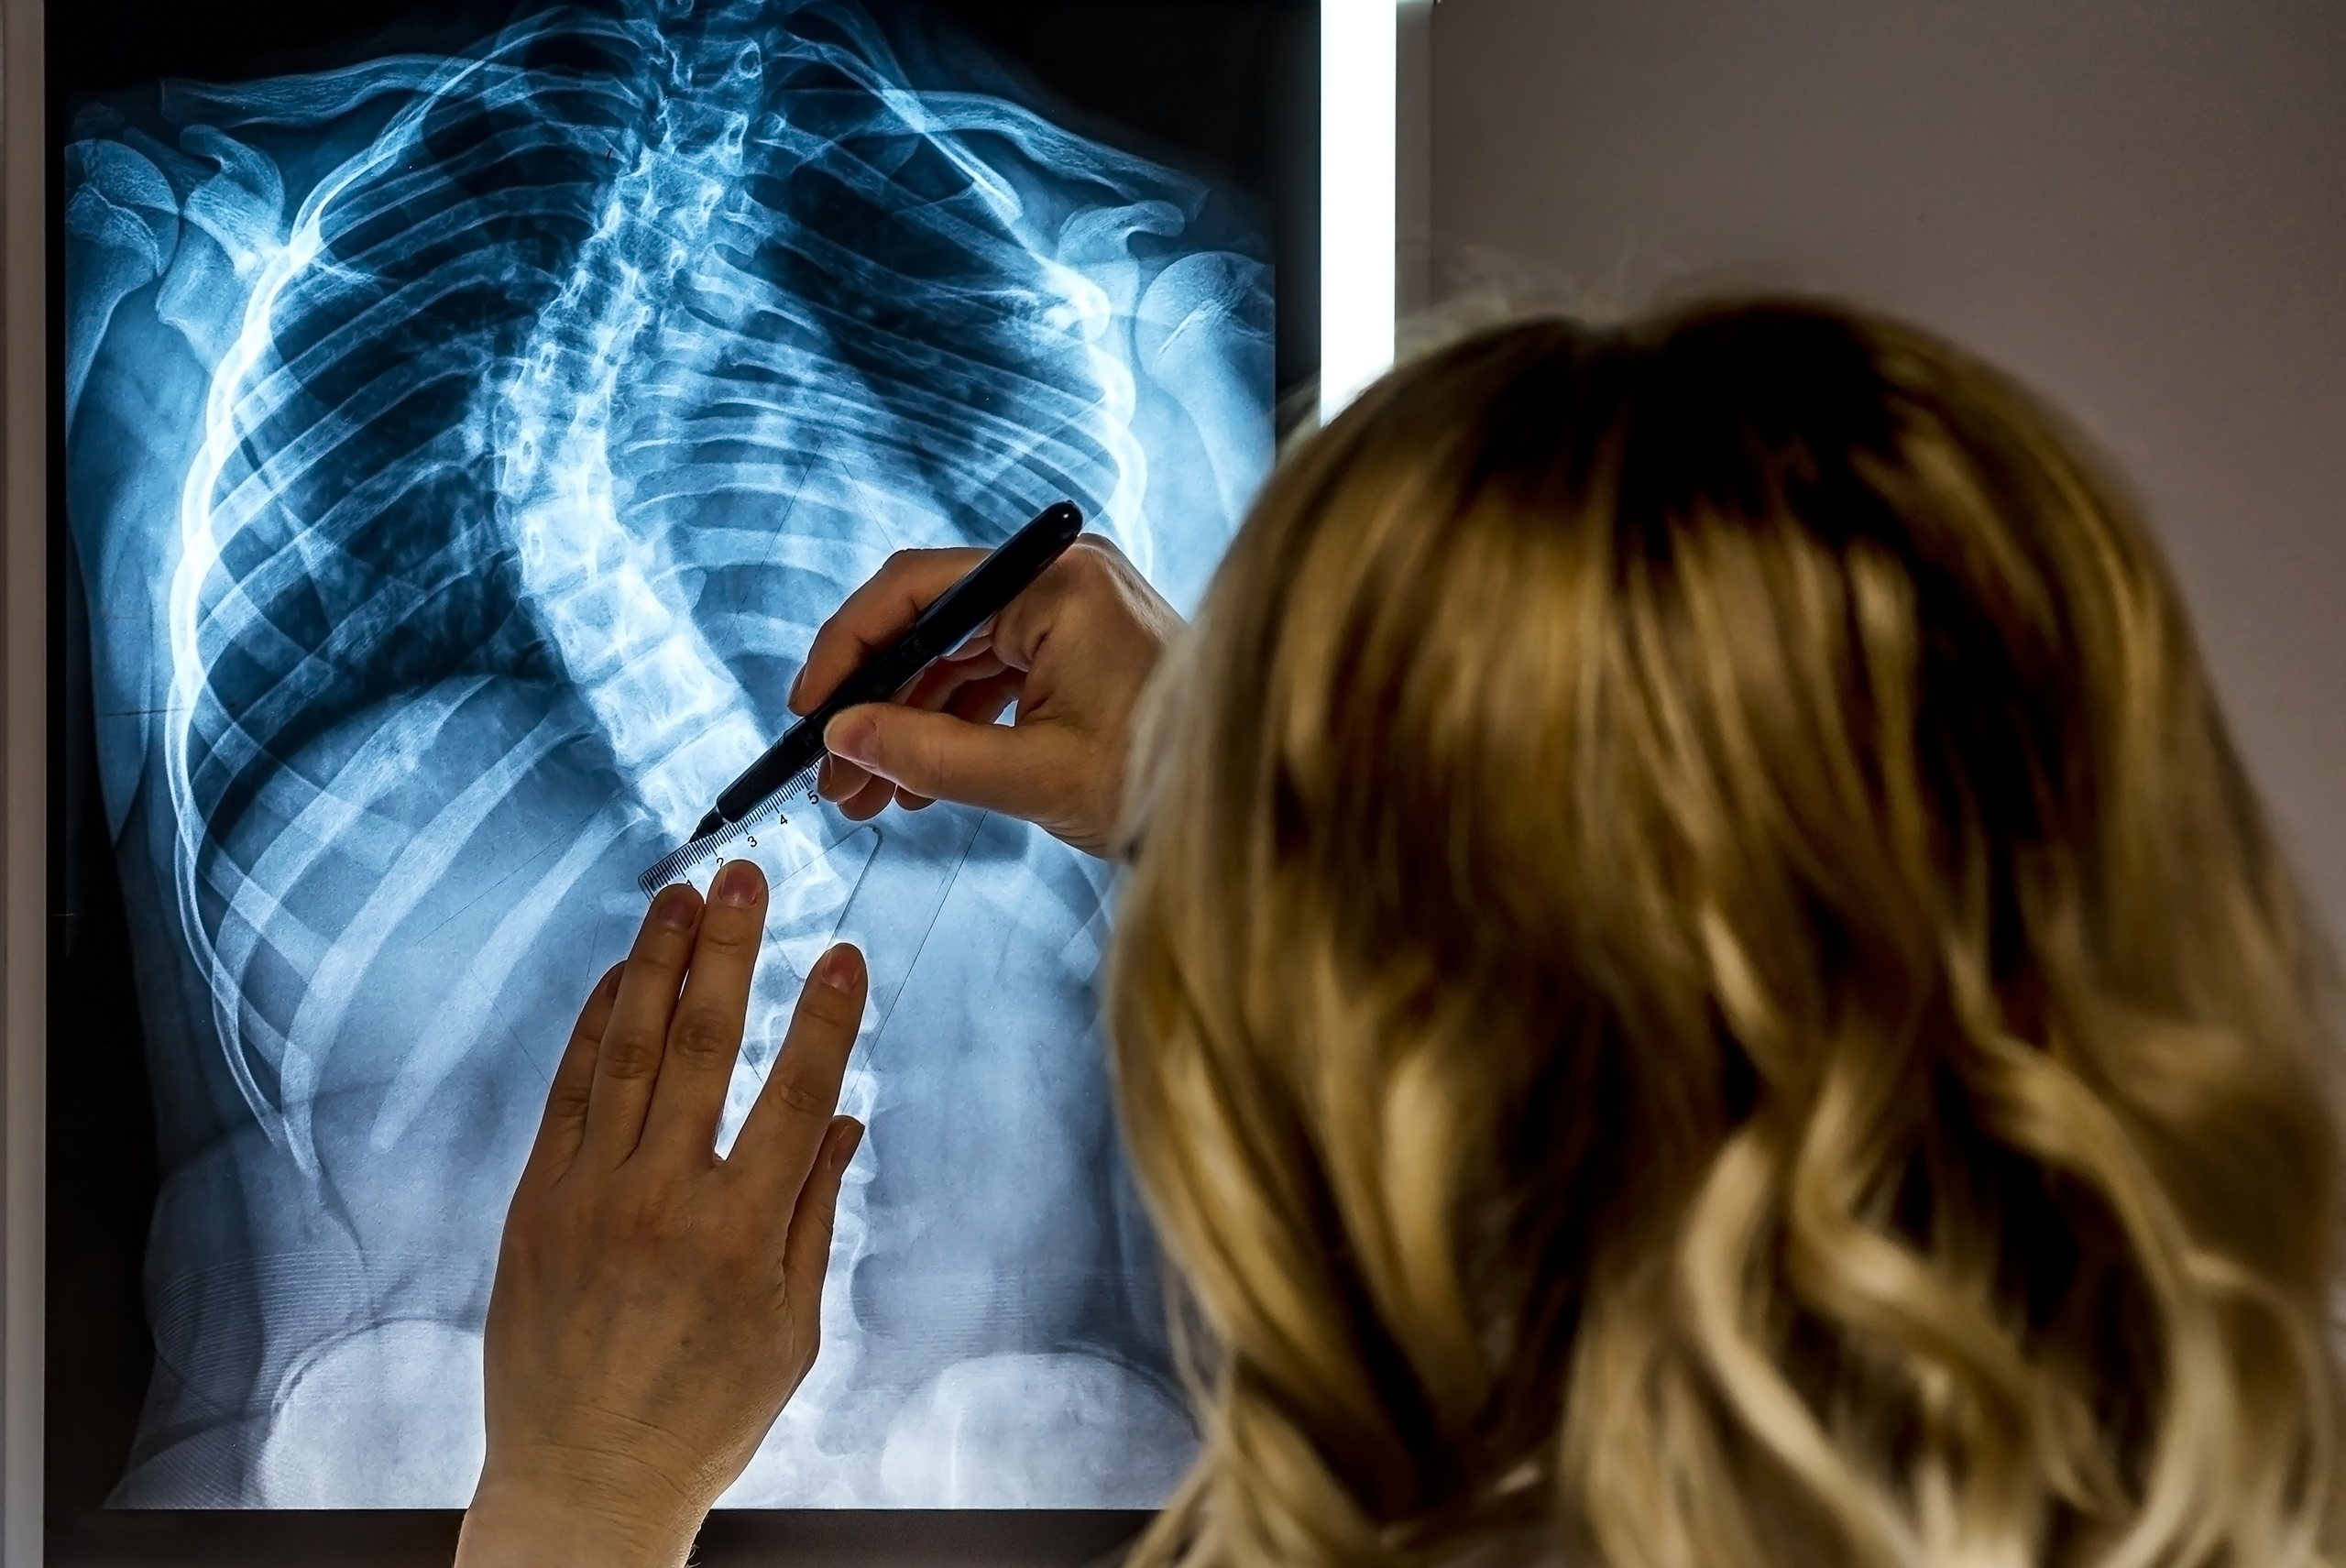 A physician explains an X-ray of a back in relation to spine surgery.